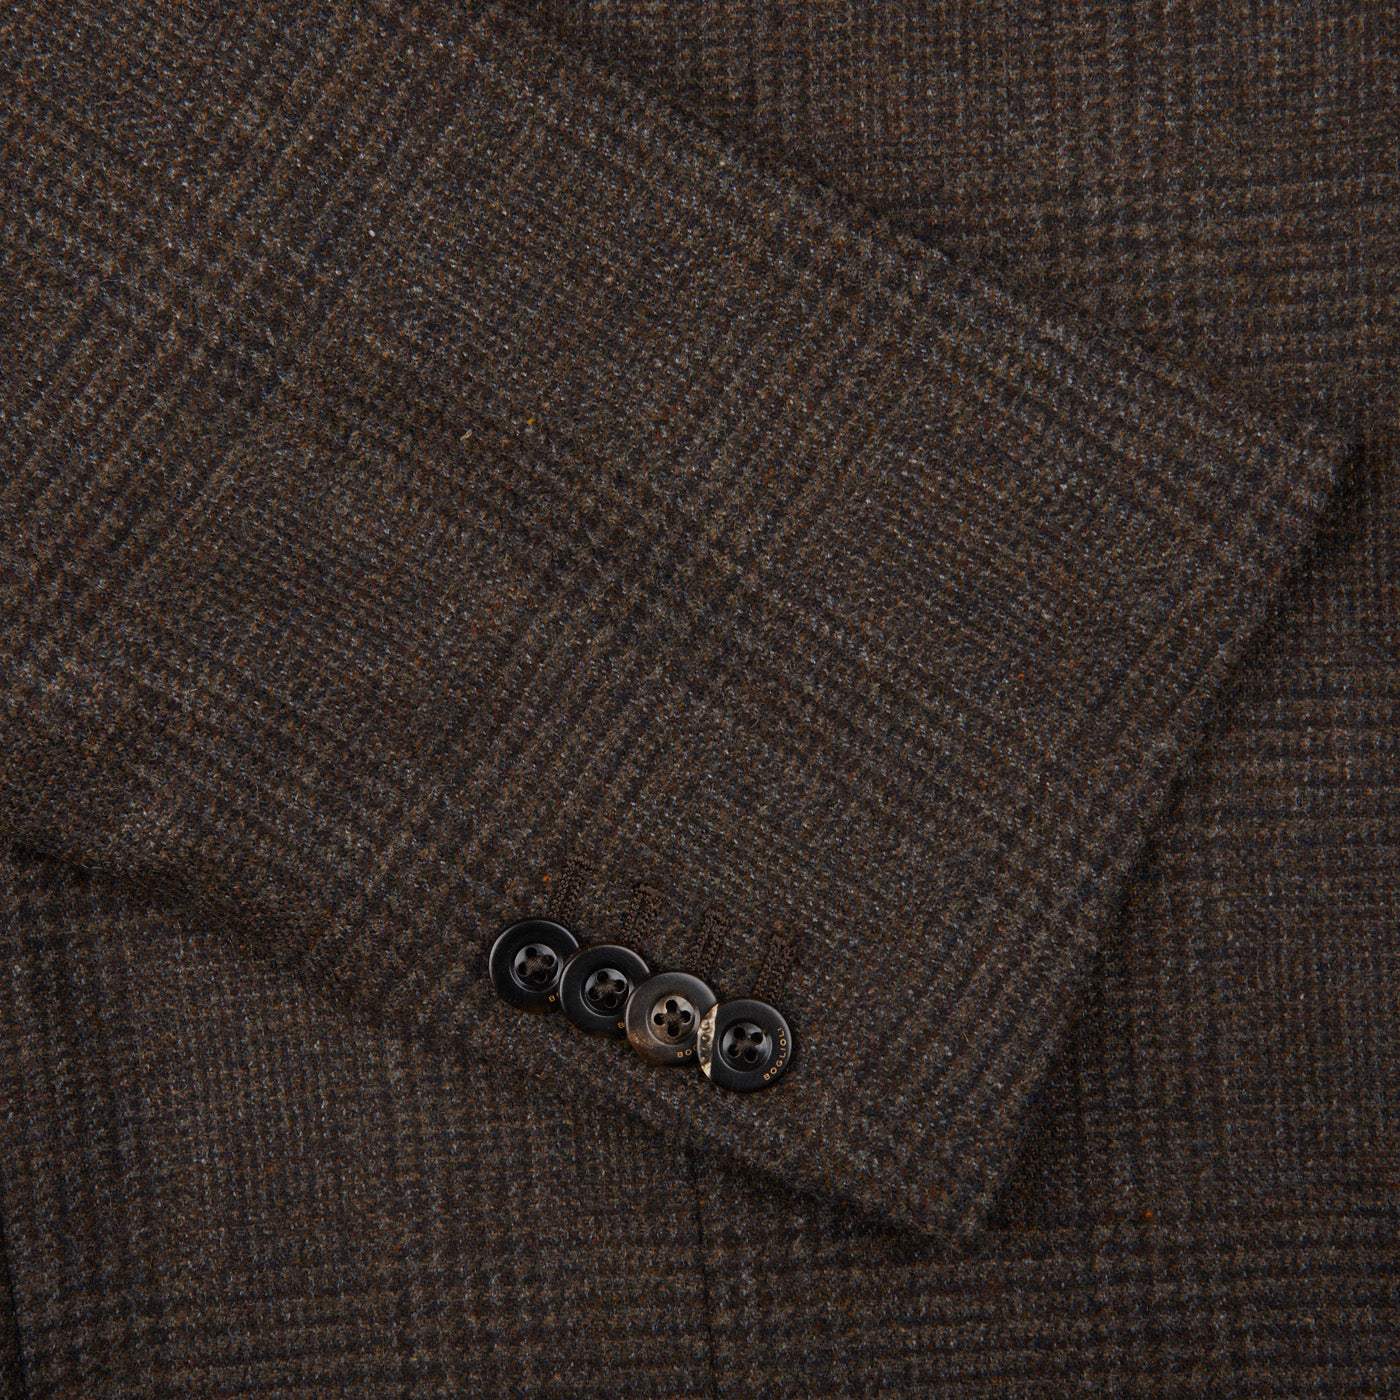 A close up of a Boglioli brown checked lambswool K Jacket suit, showcasing the exquisite craftsmanship and Italian-made quality.